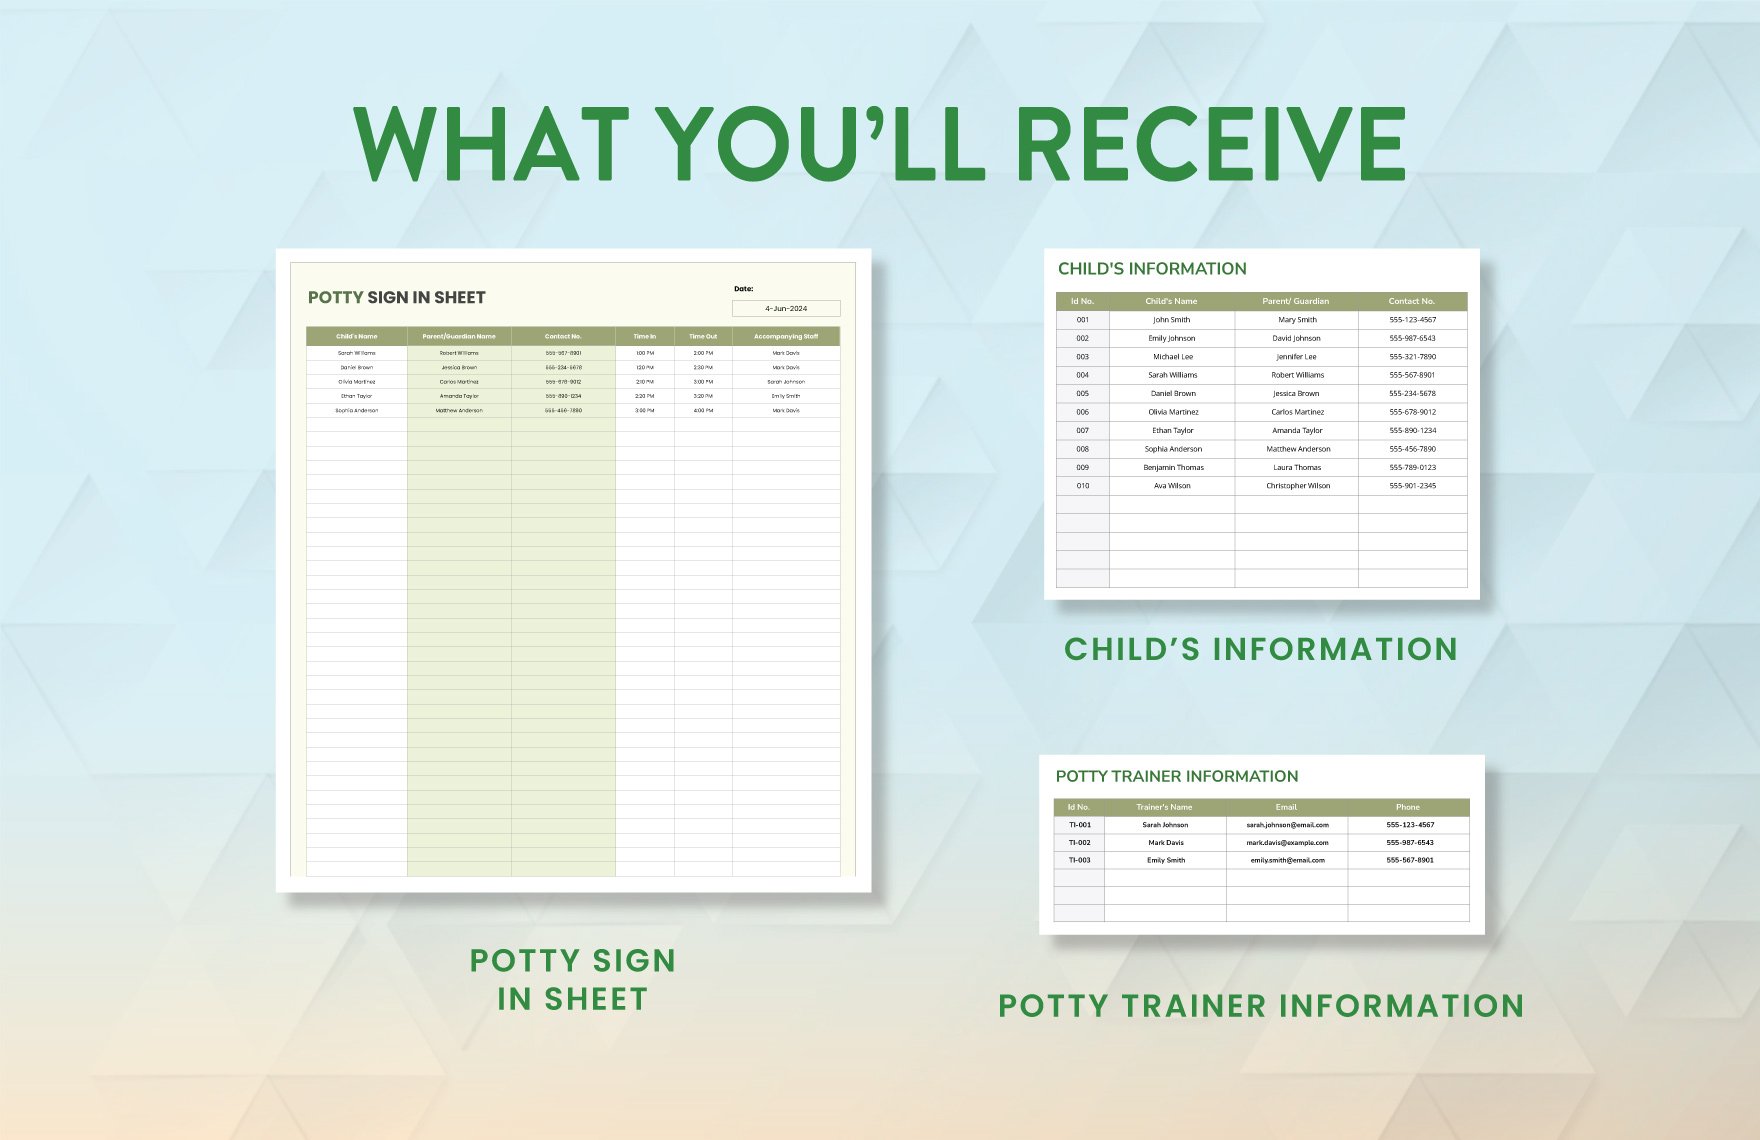 Potty Sign in Sheet Template